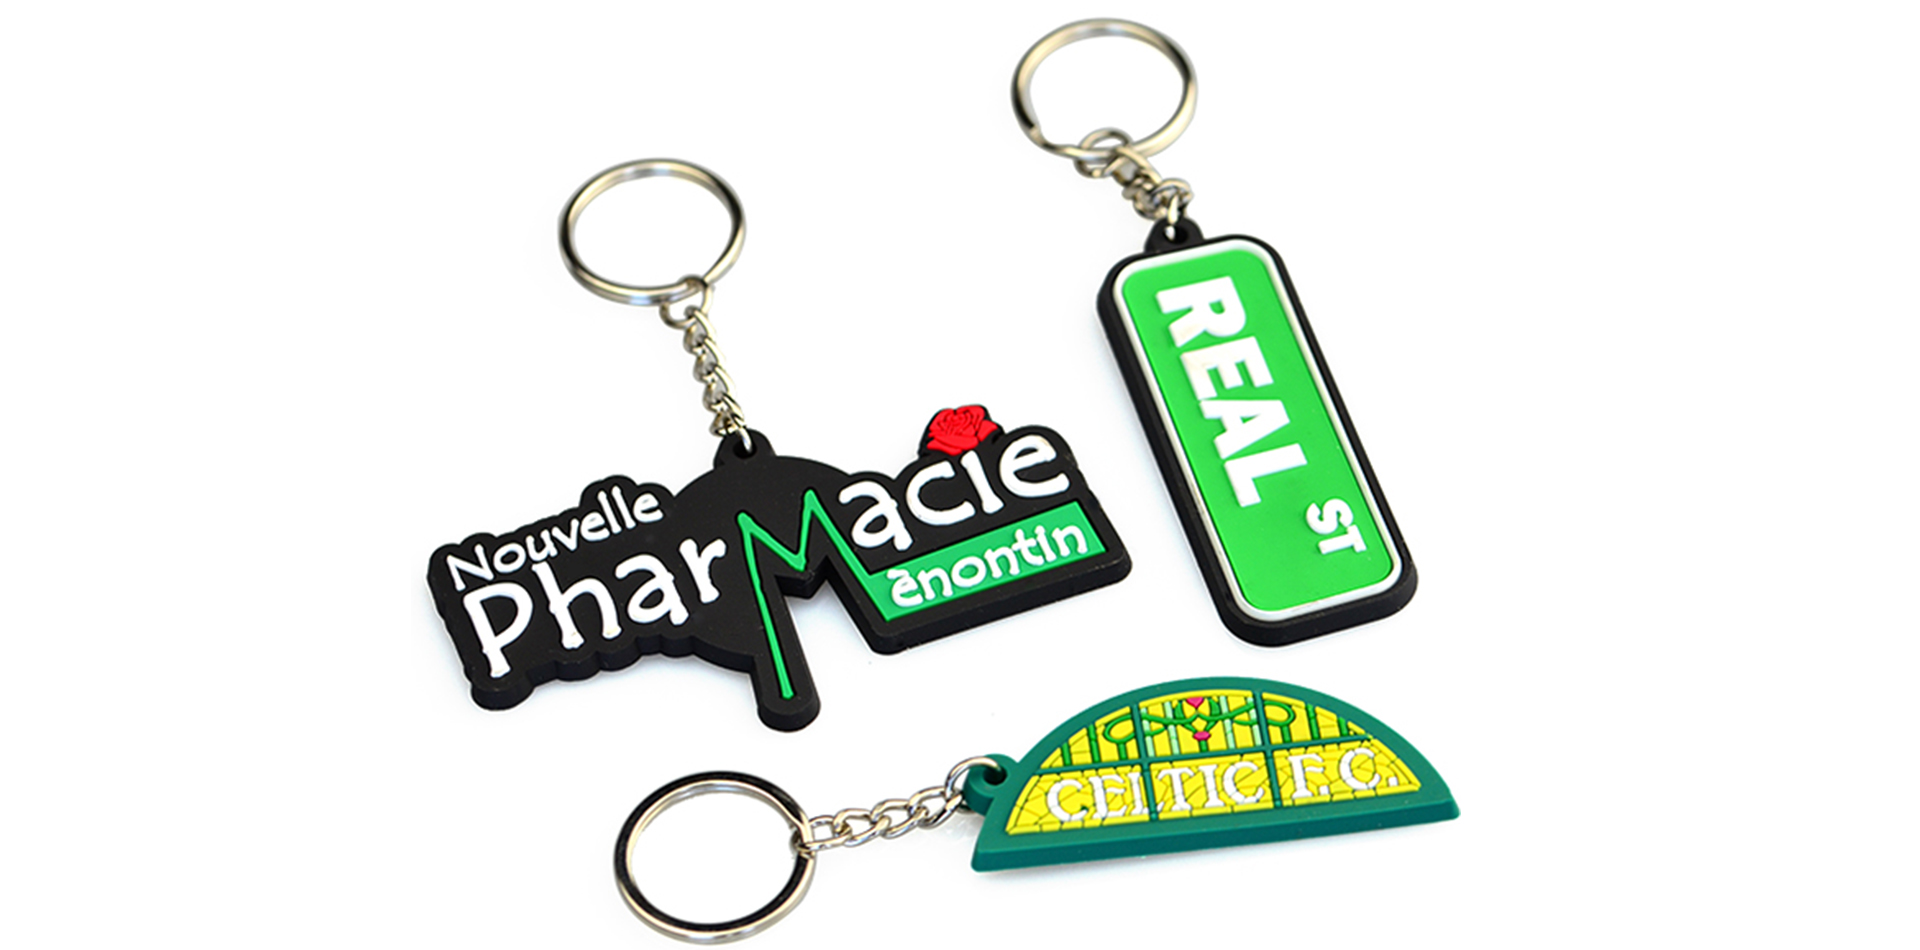 how to customize PVC keychain as a gift?